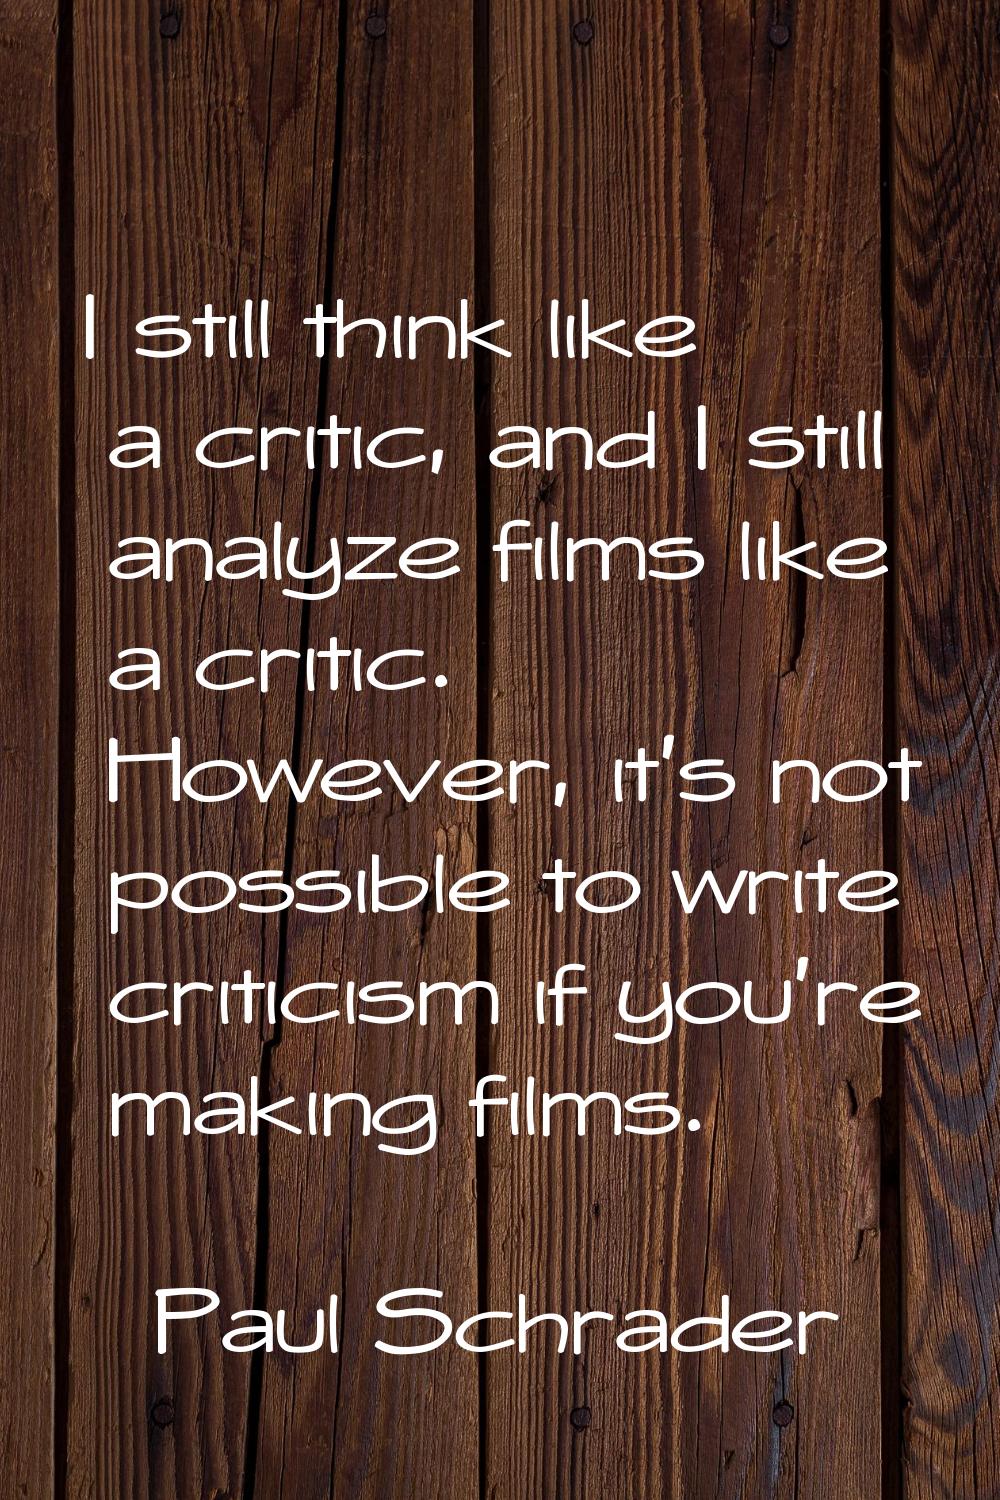 I still think like a critic, and I still analyze films like a critic. However, it's not possible to